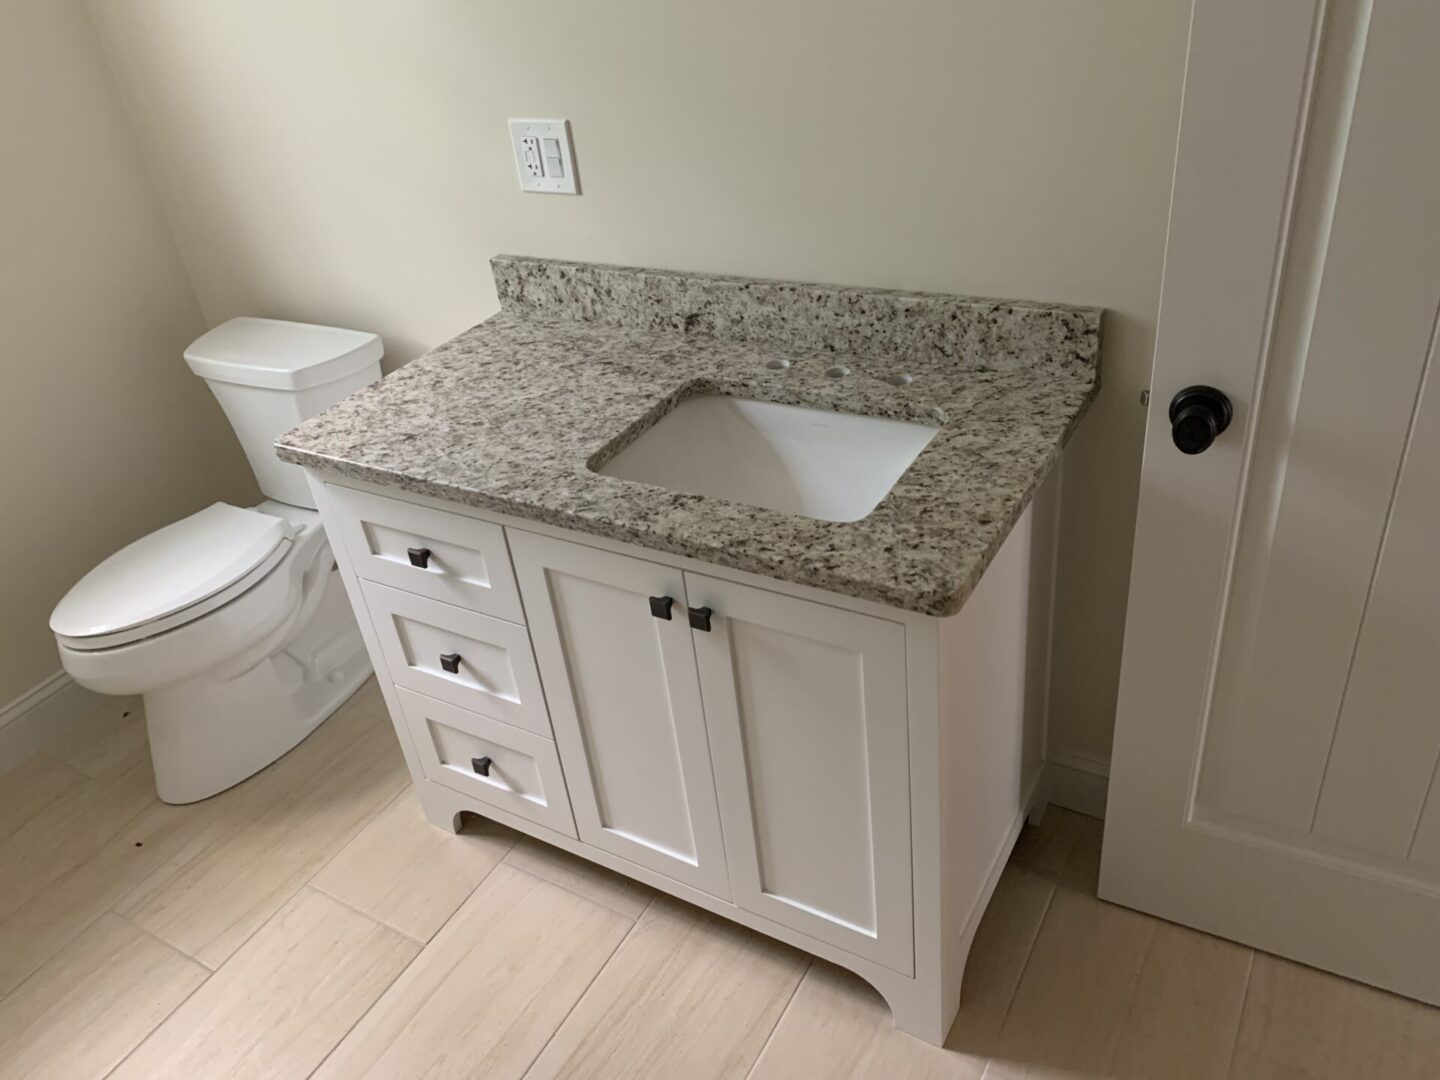 A Sink Cabinet in White With a Gray Granite